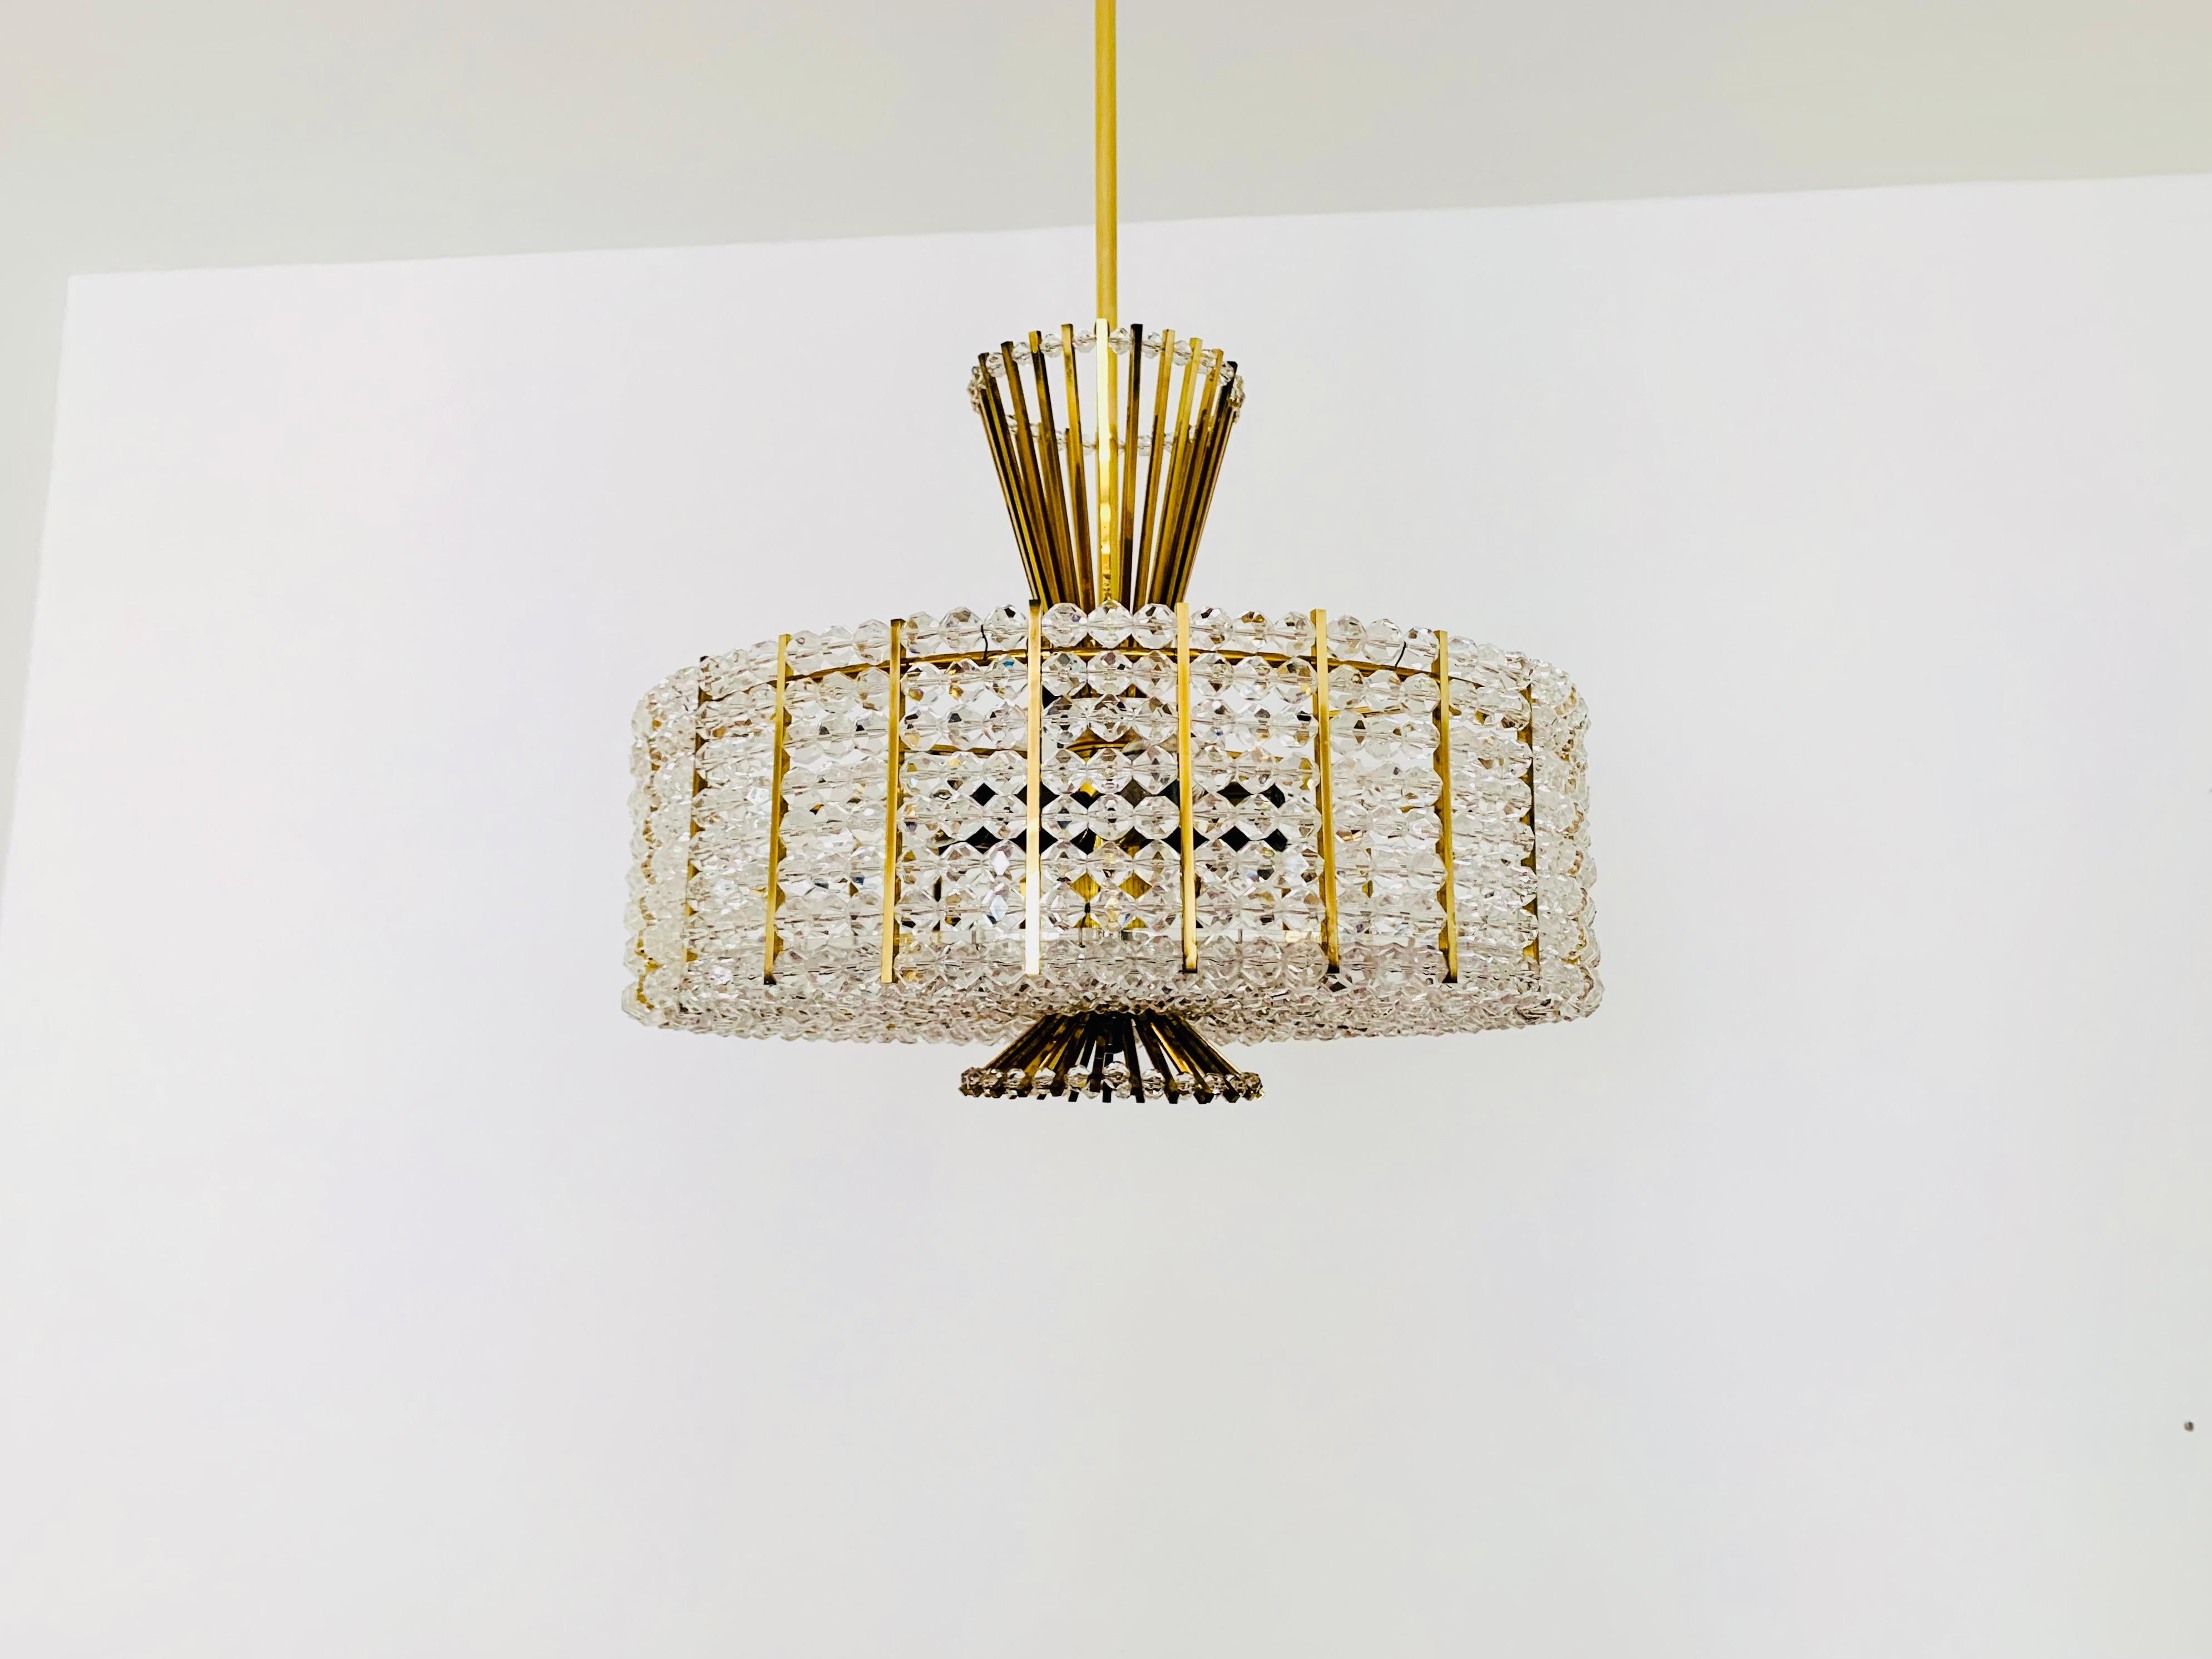 Wonderful chandelier from the 1960s.
The lamp with its lavishly equipped plexiglas balls and the brass details has a very luxurious look and sparkles particularly beautifully.
The design and the materials used create a great glittering light.
A